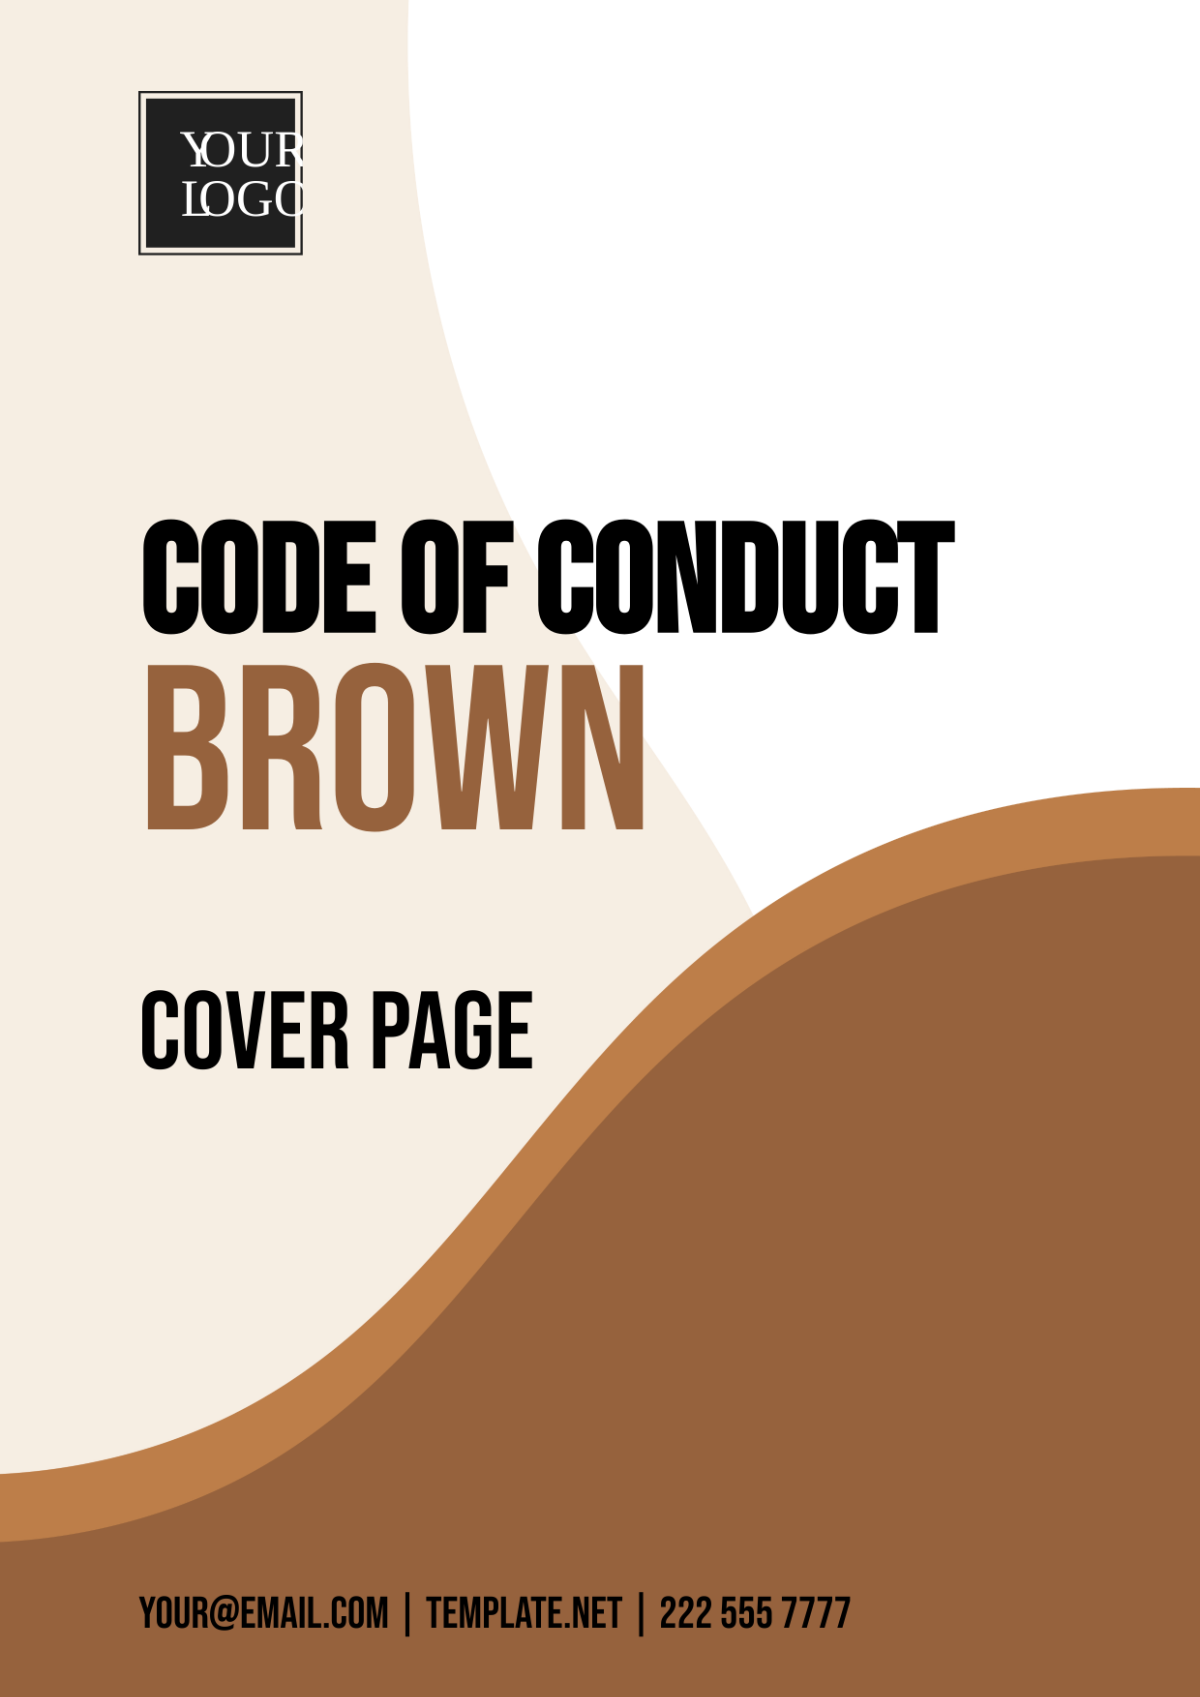 Code of Conduct Brown Cover Page Template